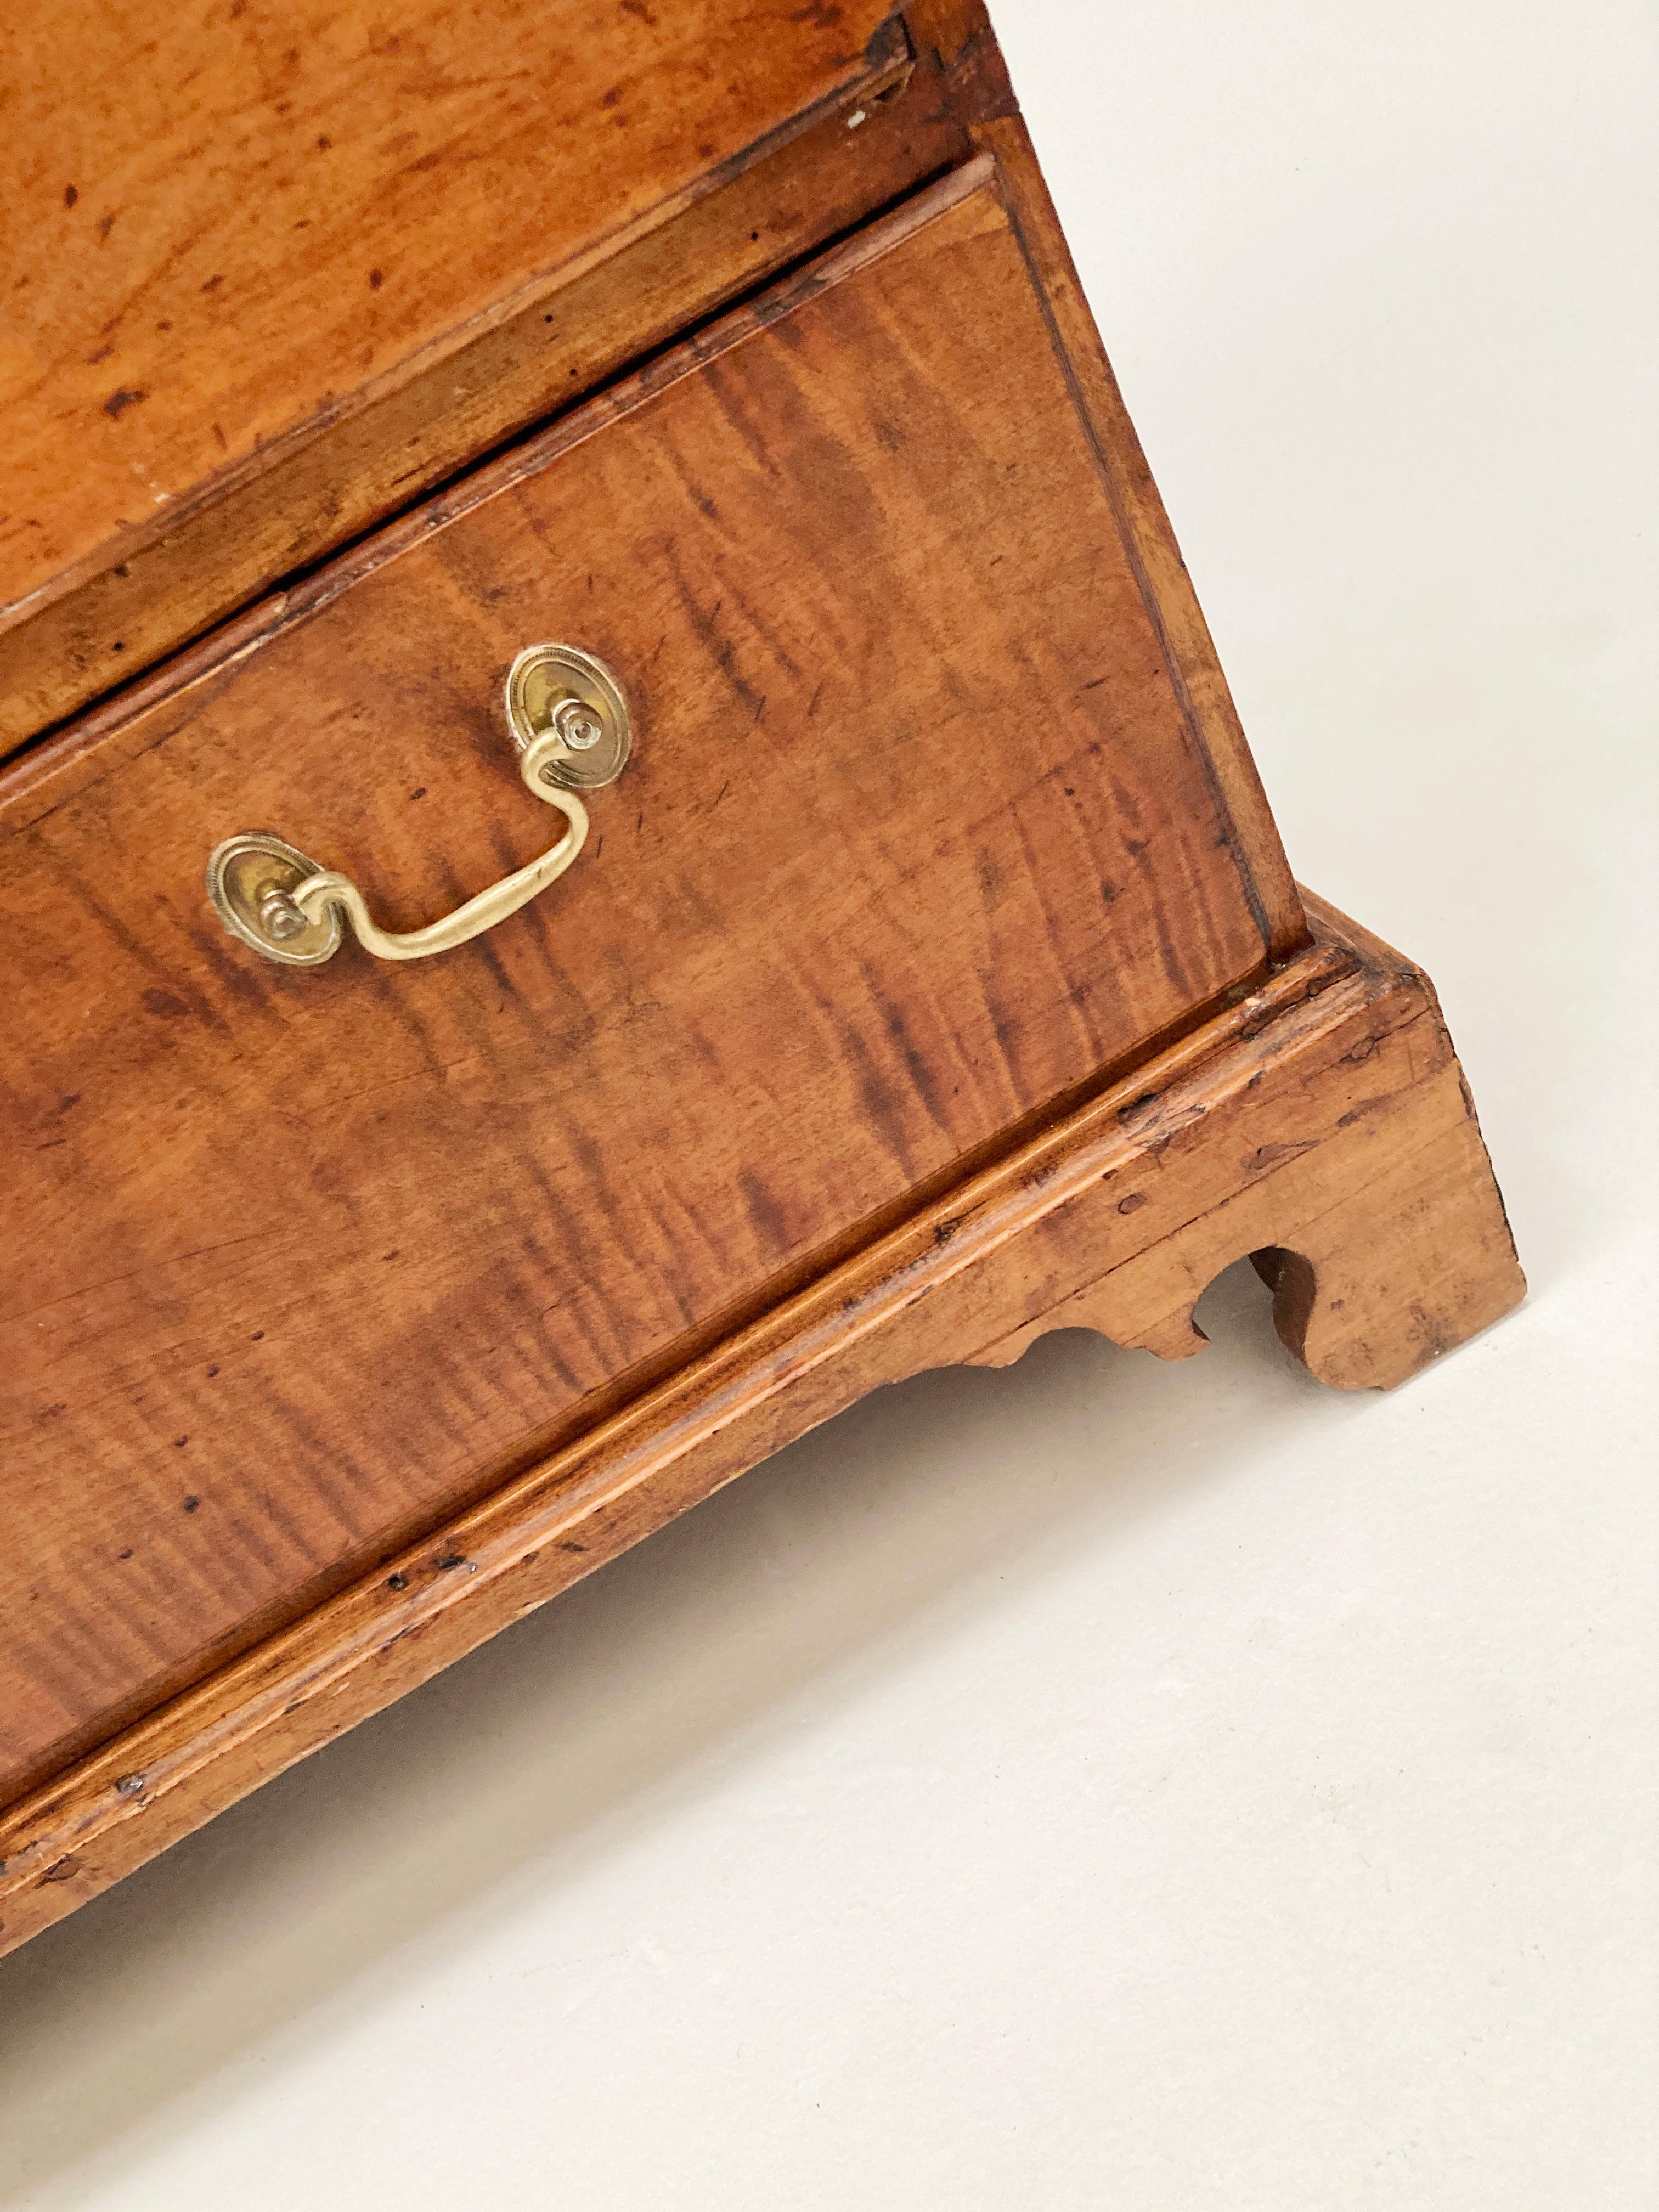 Early American 18th Century Chippendale Tiger Maple Tall Chest of Drawers For Sale 1